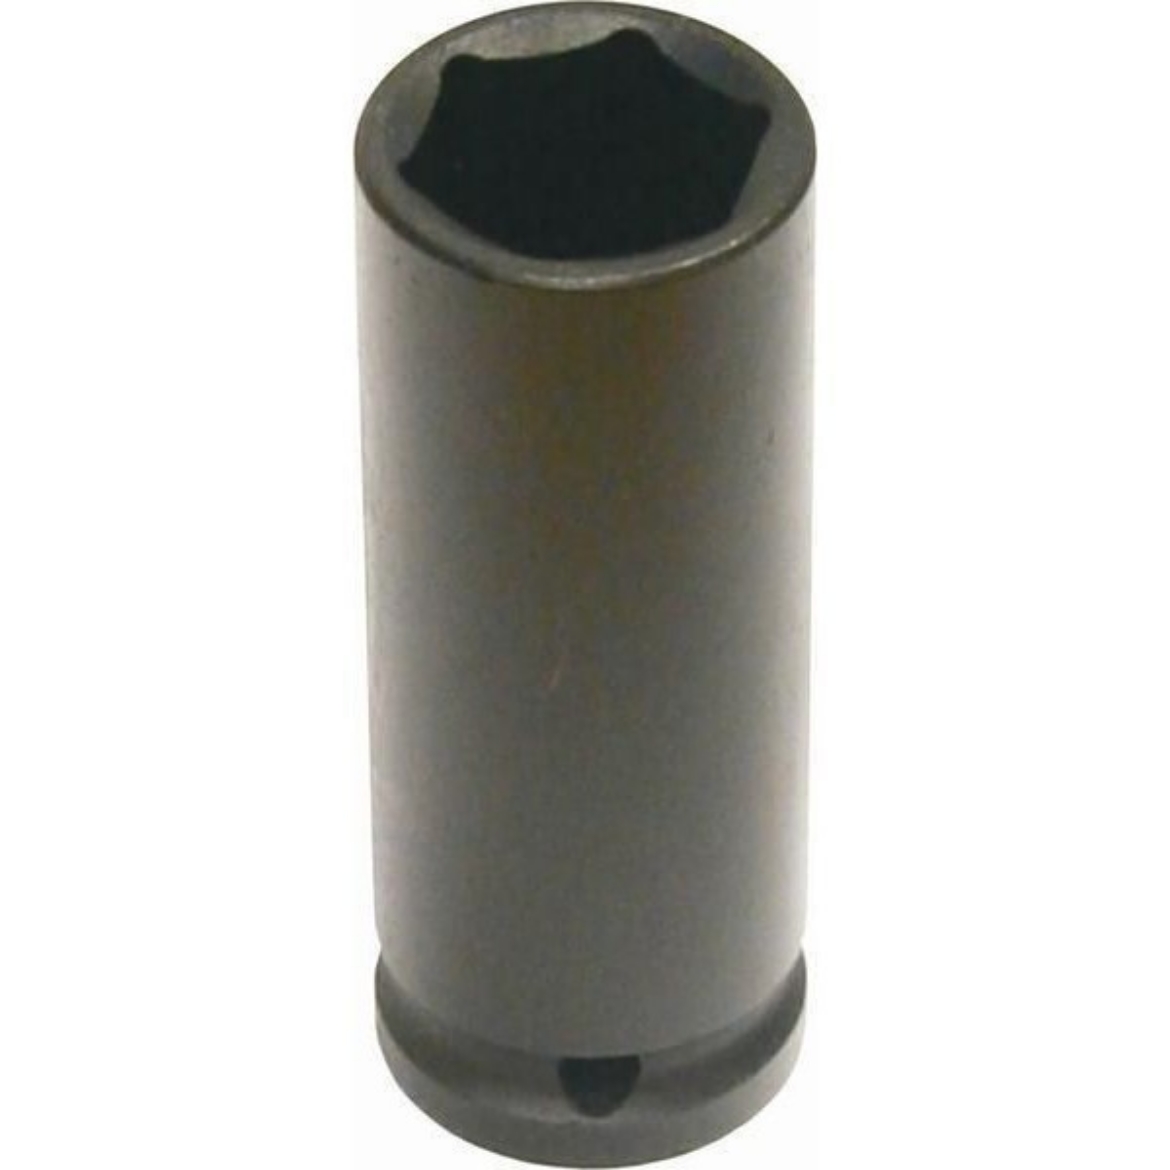 Picture of SOCKET IMPACT 3/4"DR 6PT SAE DEEP 2-1/8" SP TOOLS